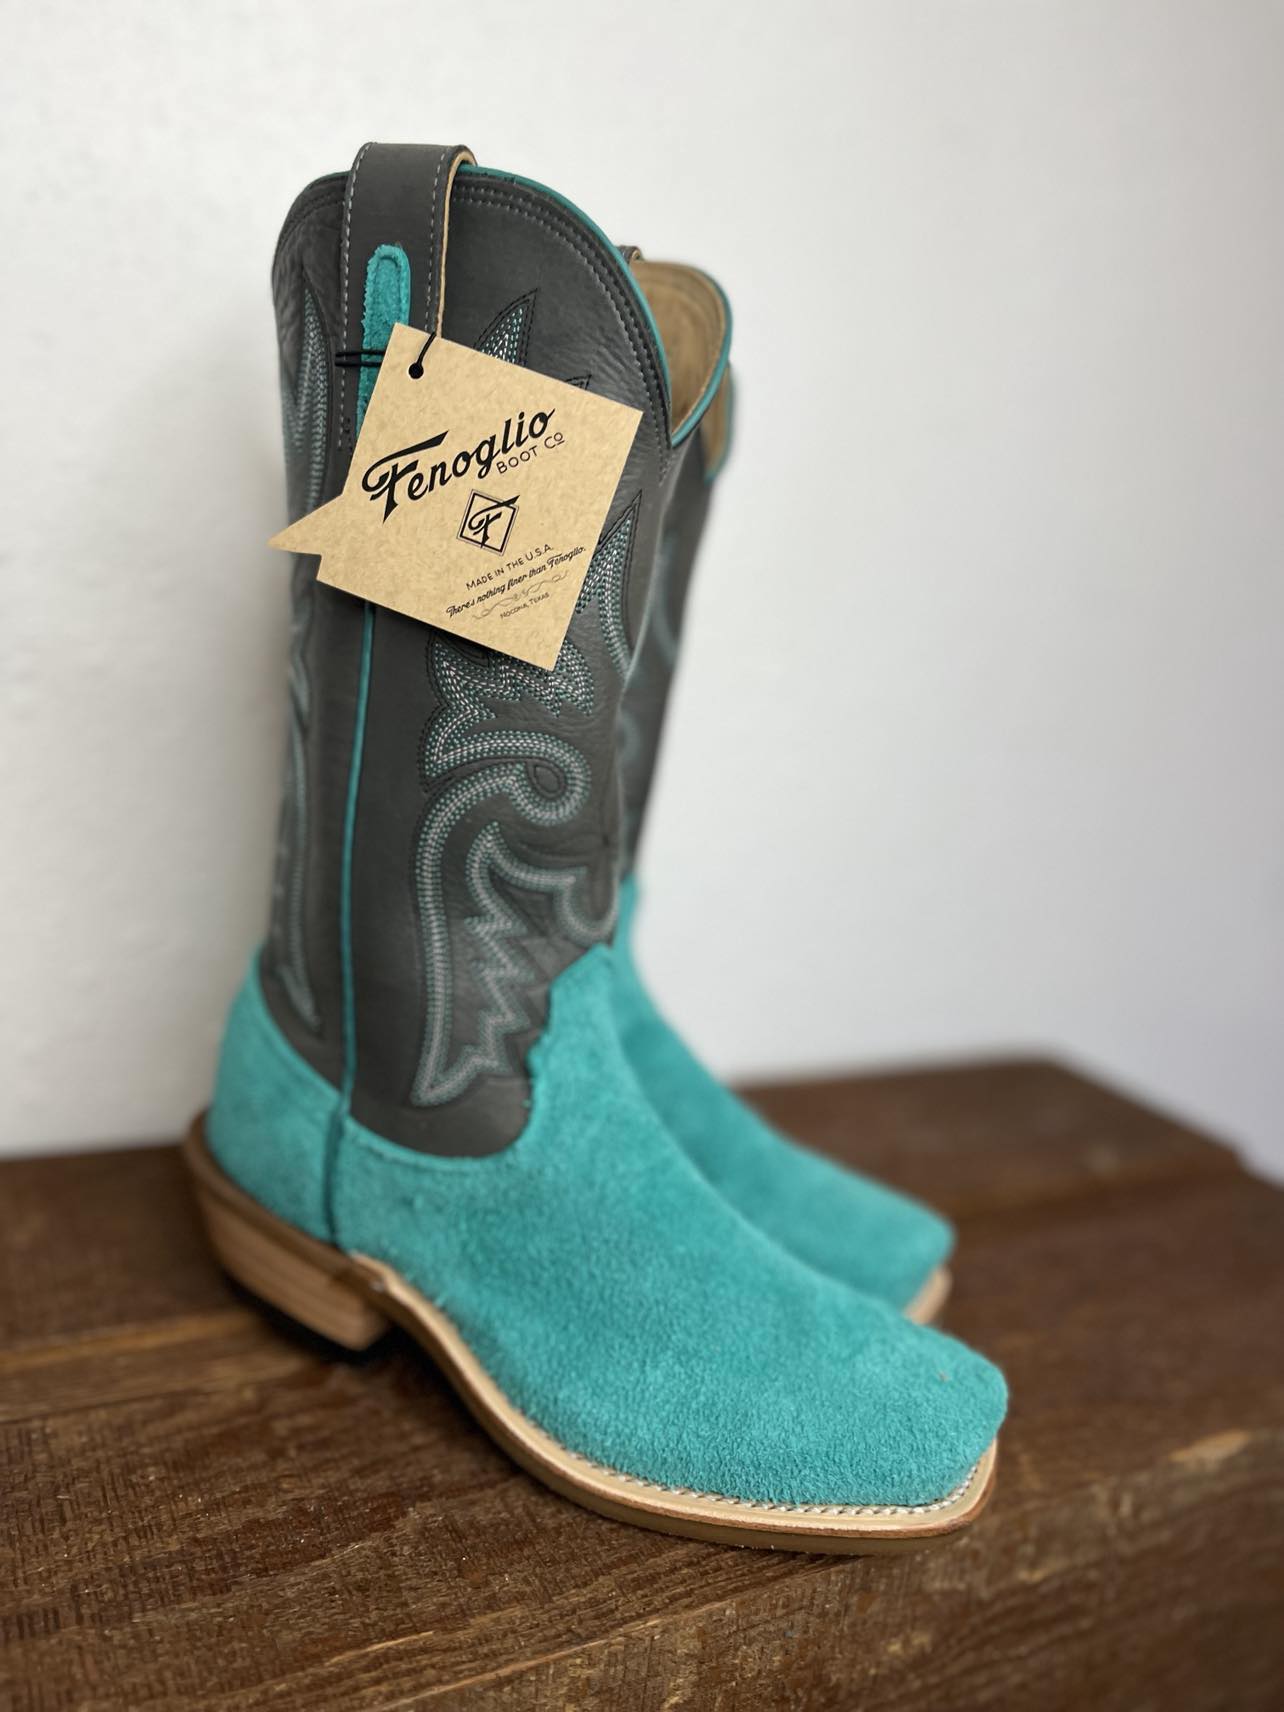 Women's Fenoglio Turquoise Moto Roughout W/ Space Grey Boots-Women's Boots-Fenoglio Boots-Lucky J Boots & More, Women's, Men's, & Kids Western Store Located in Carthage, MO